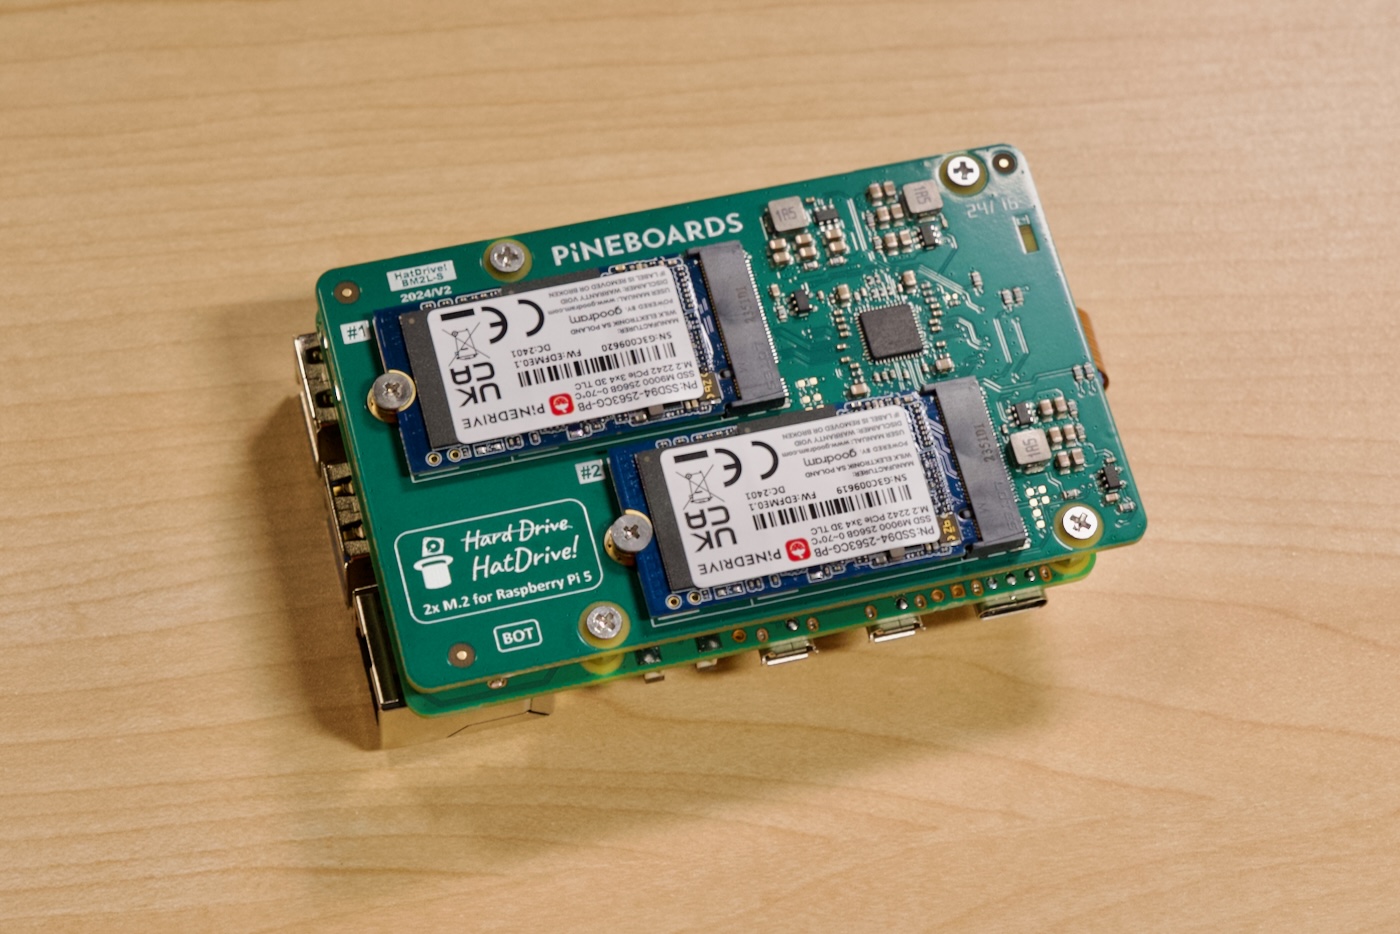 Pineboards dual NVMe HAT